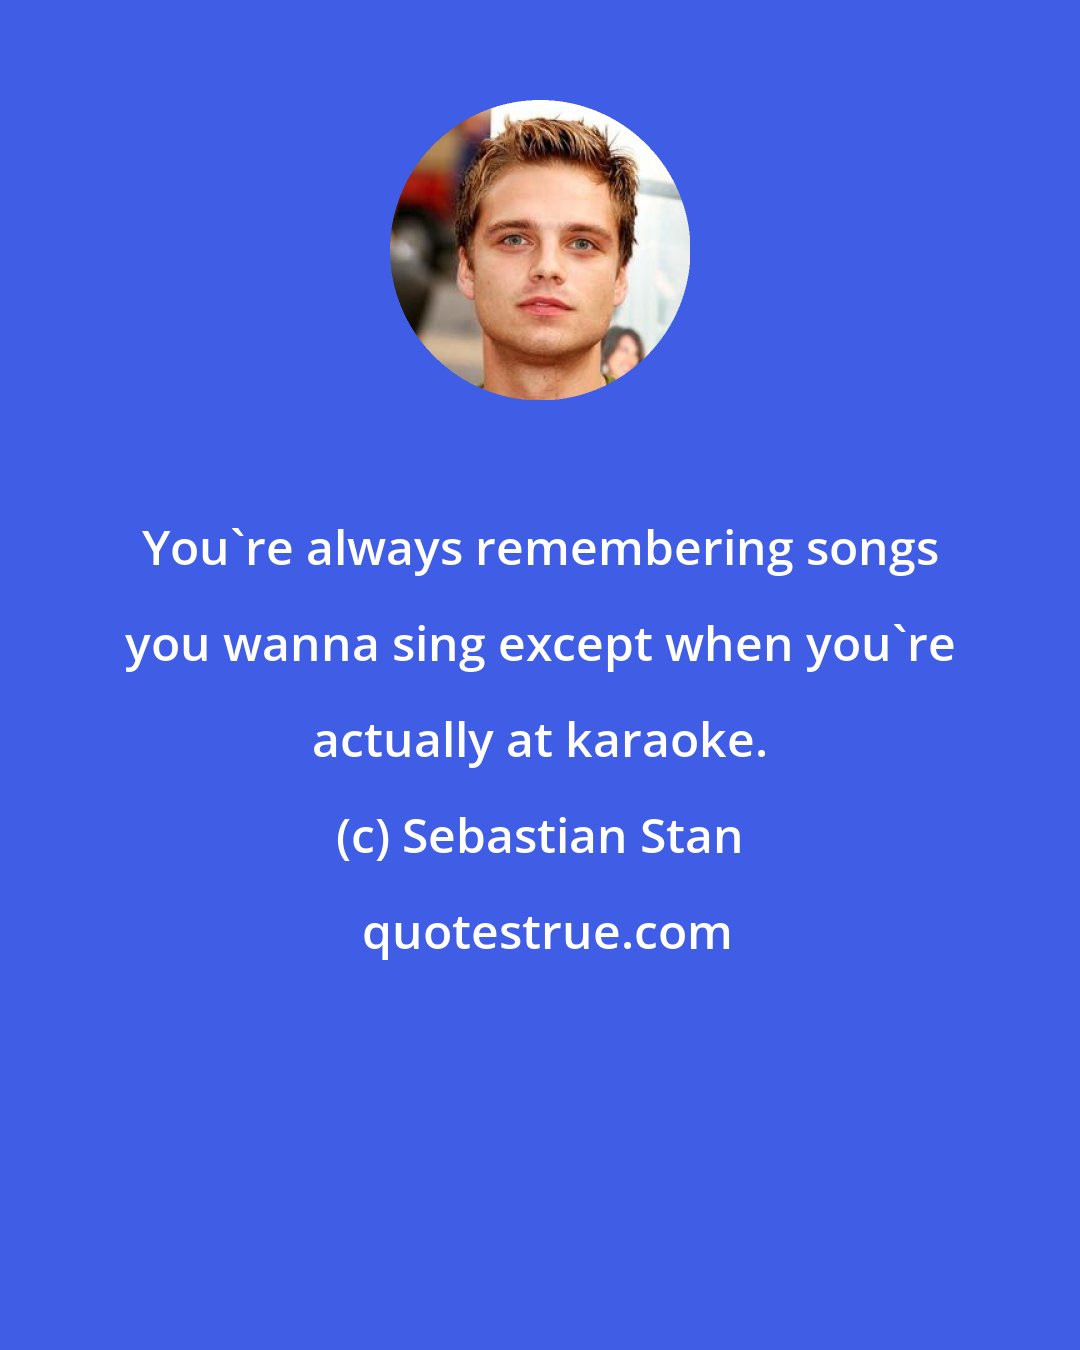 Sebastian Stan: You're always remembering songs you wanna sing except when you're actually at karaoke.